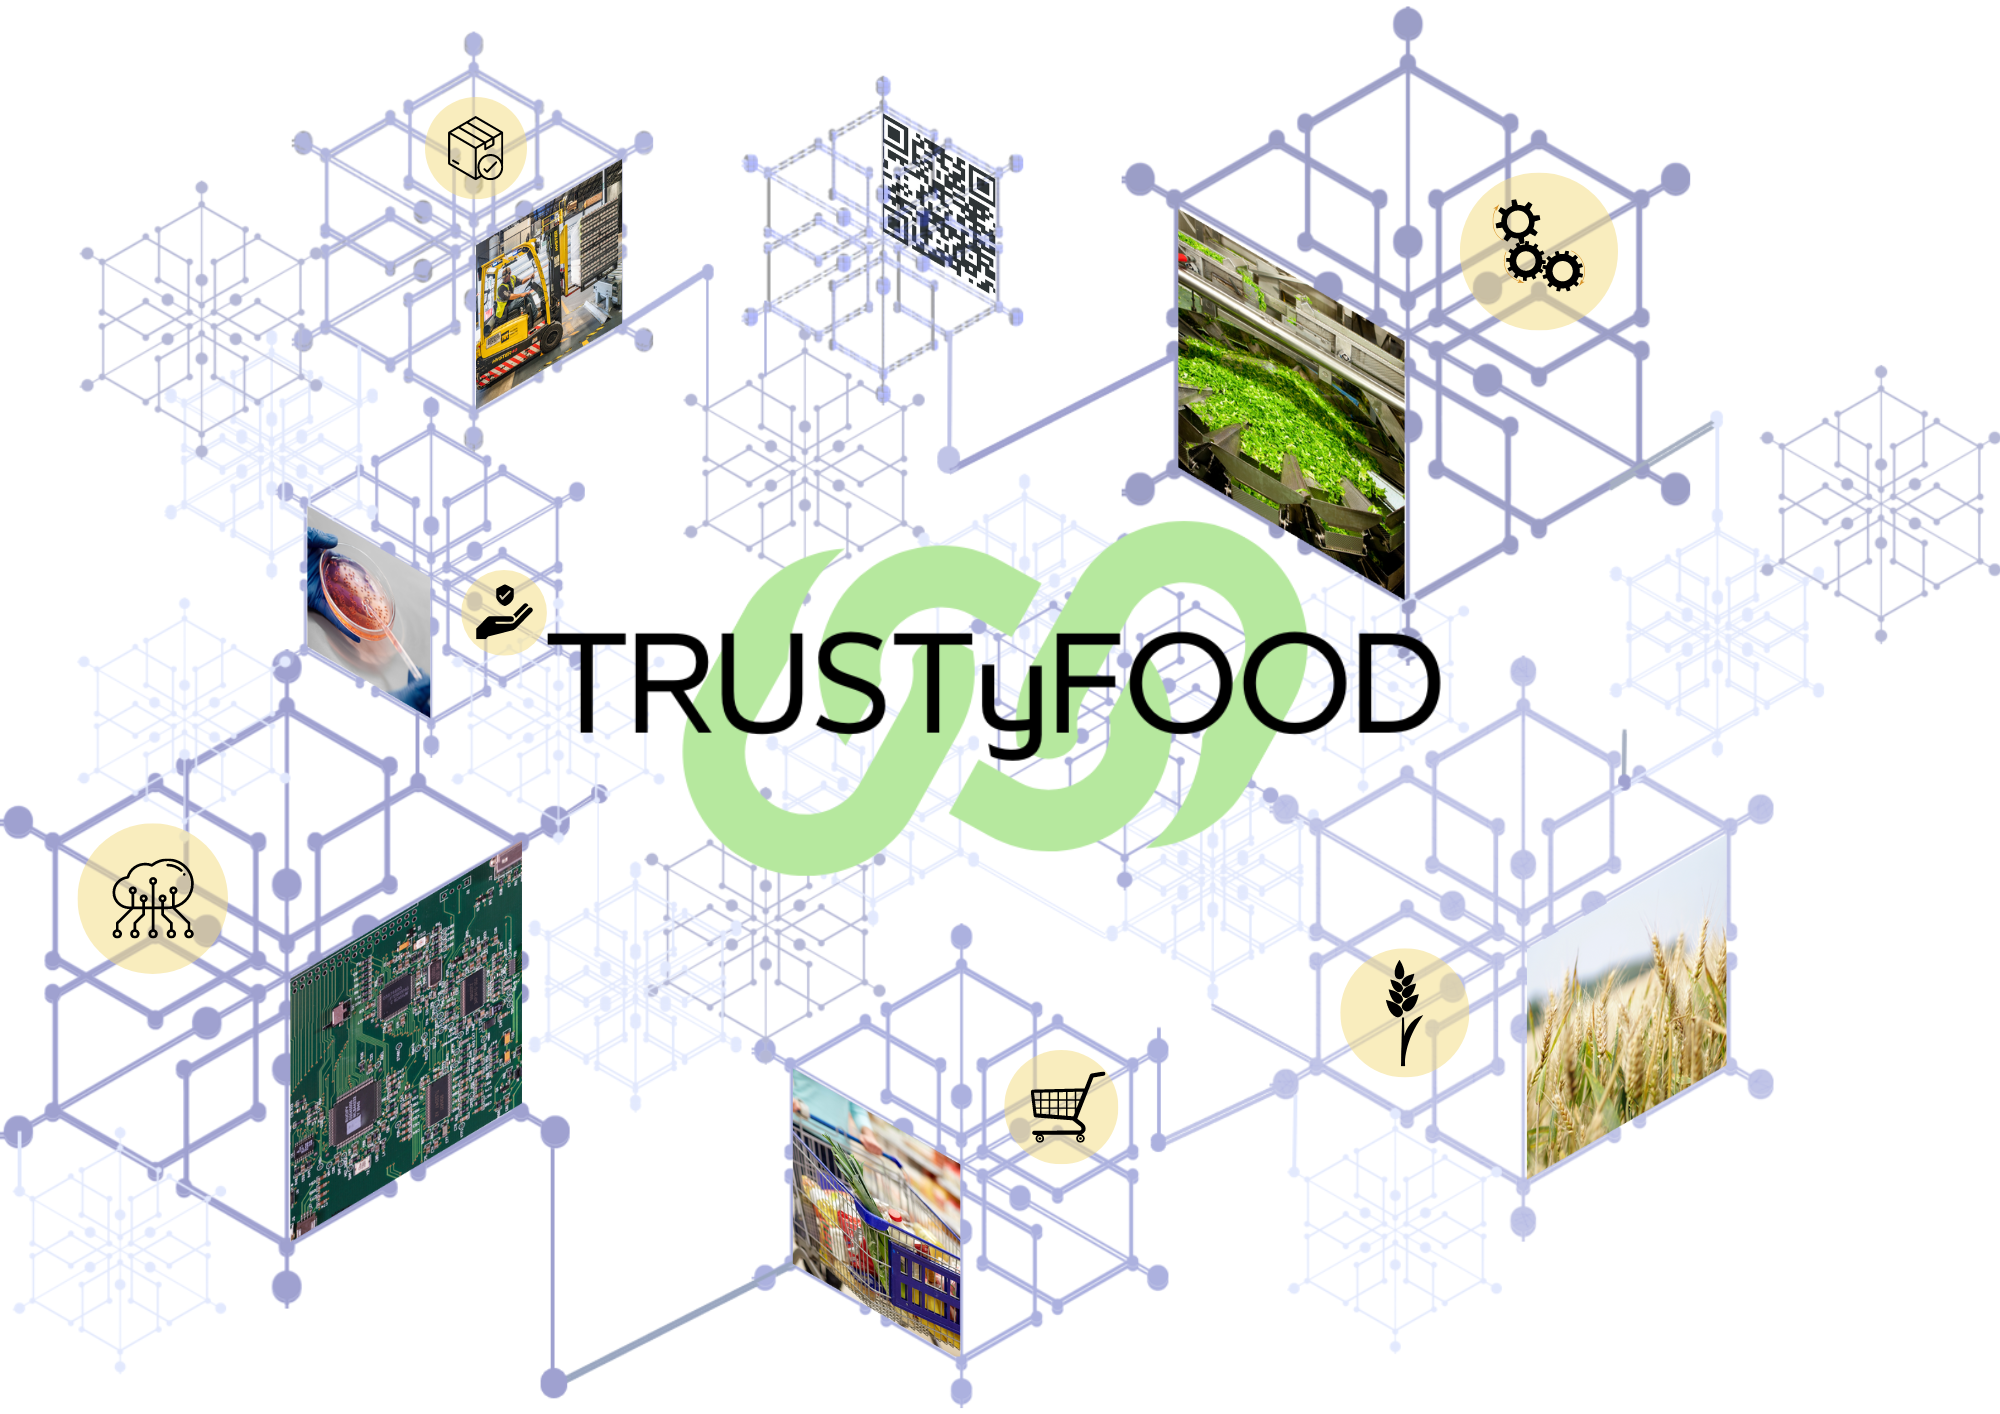 Stakeholders-driven pathways for blockchain implementation in the agri-food sector – TRUSTYFOOD